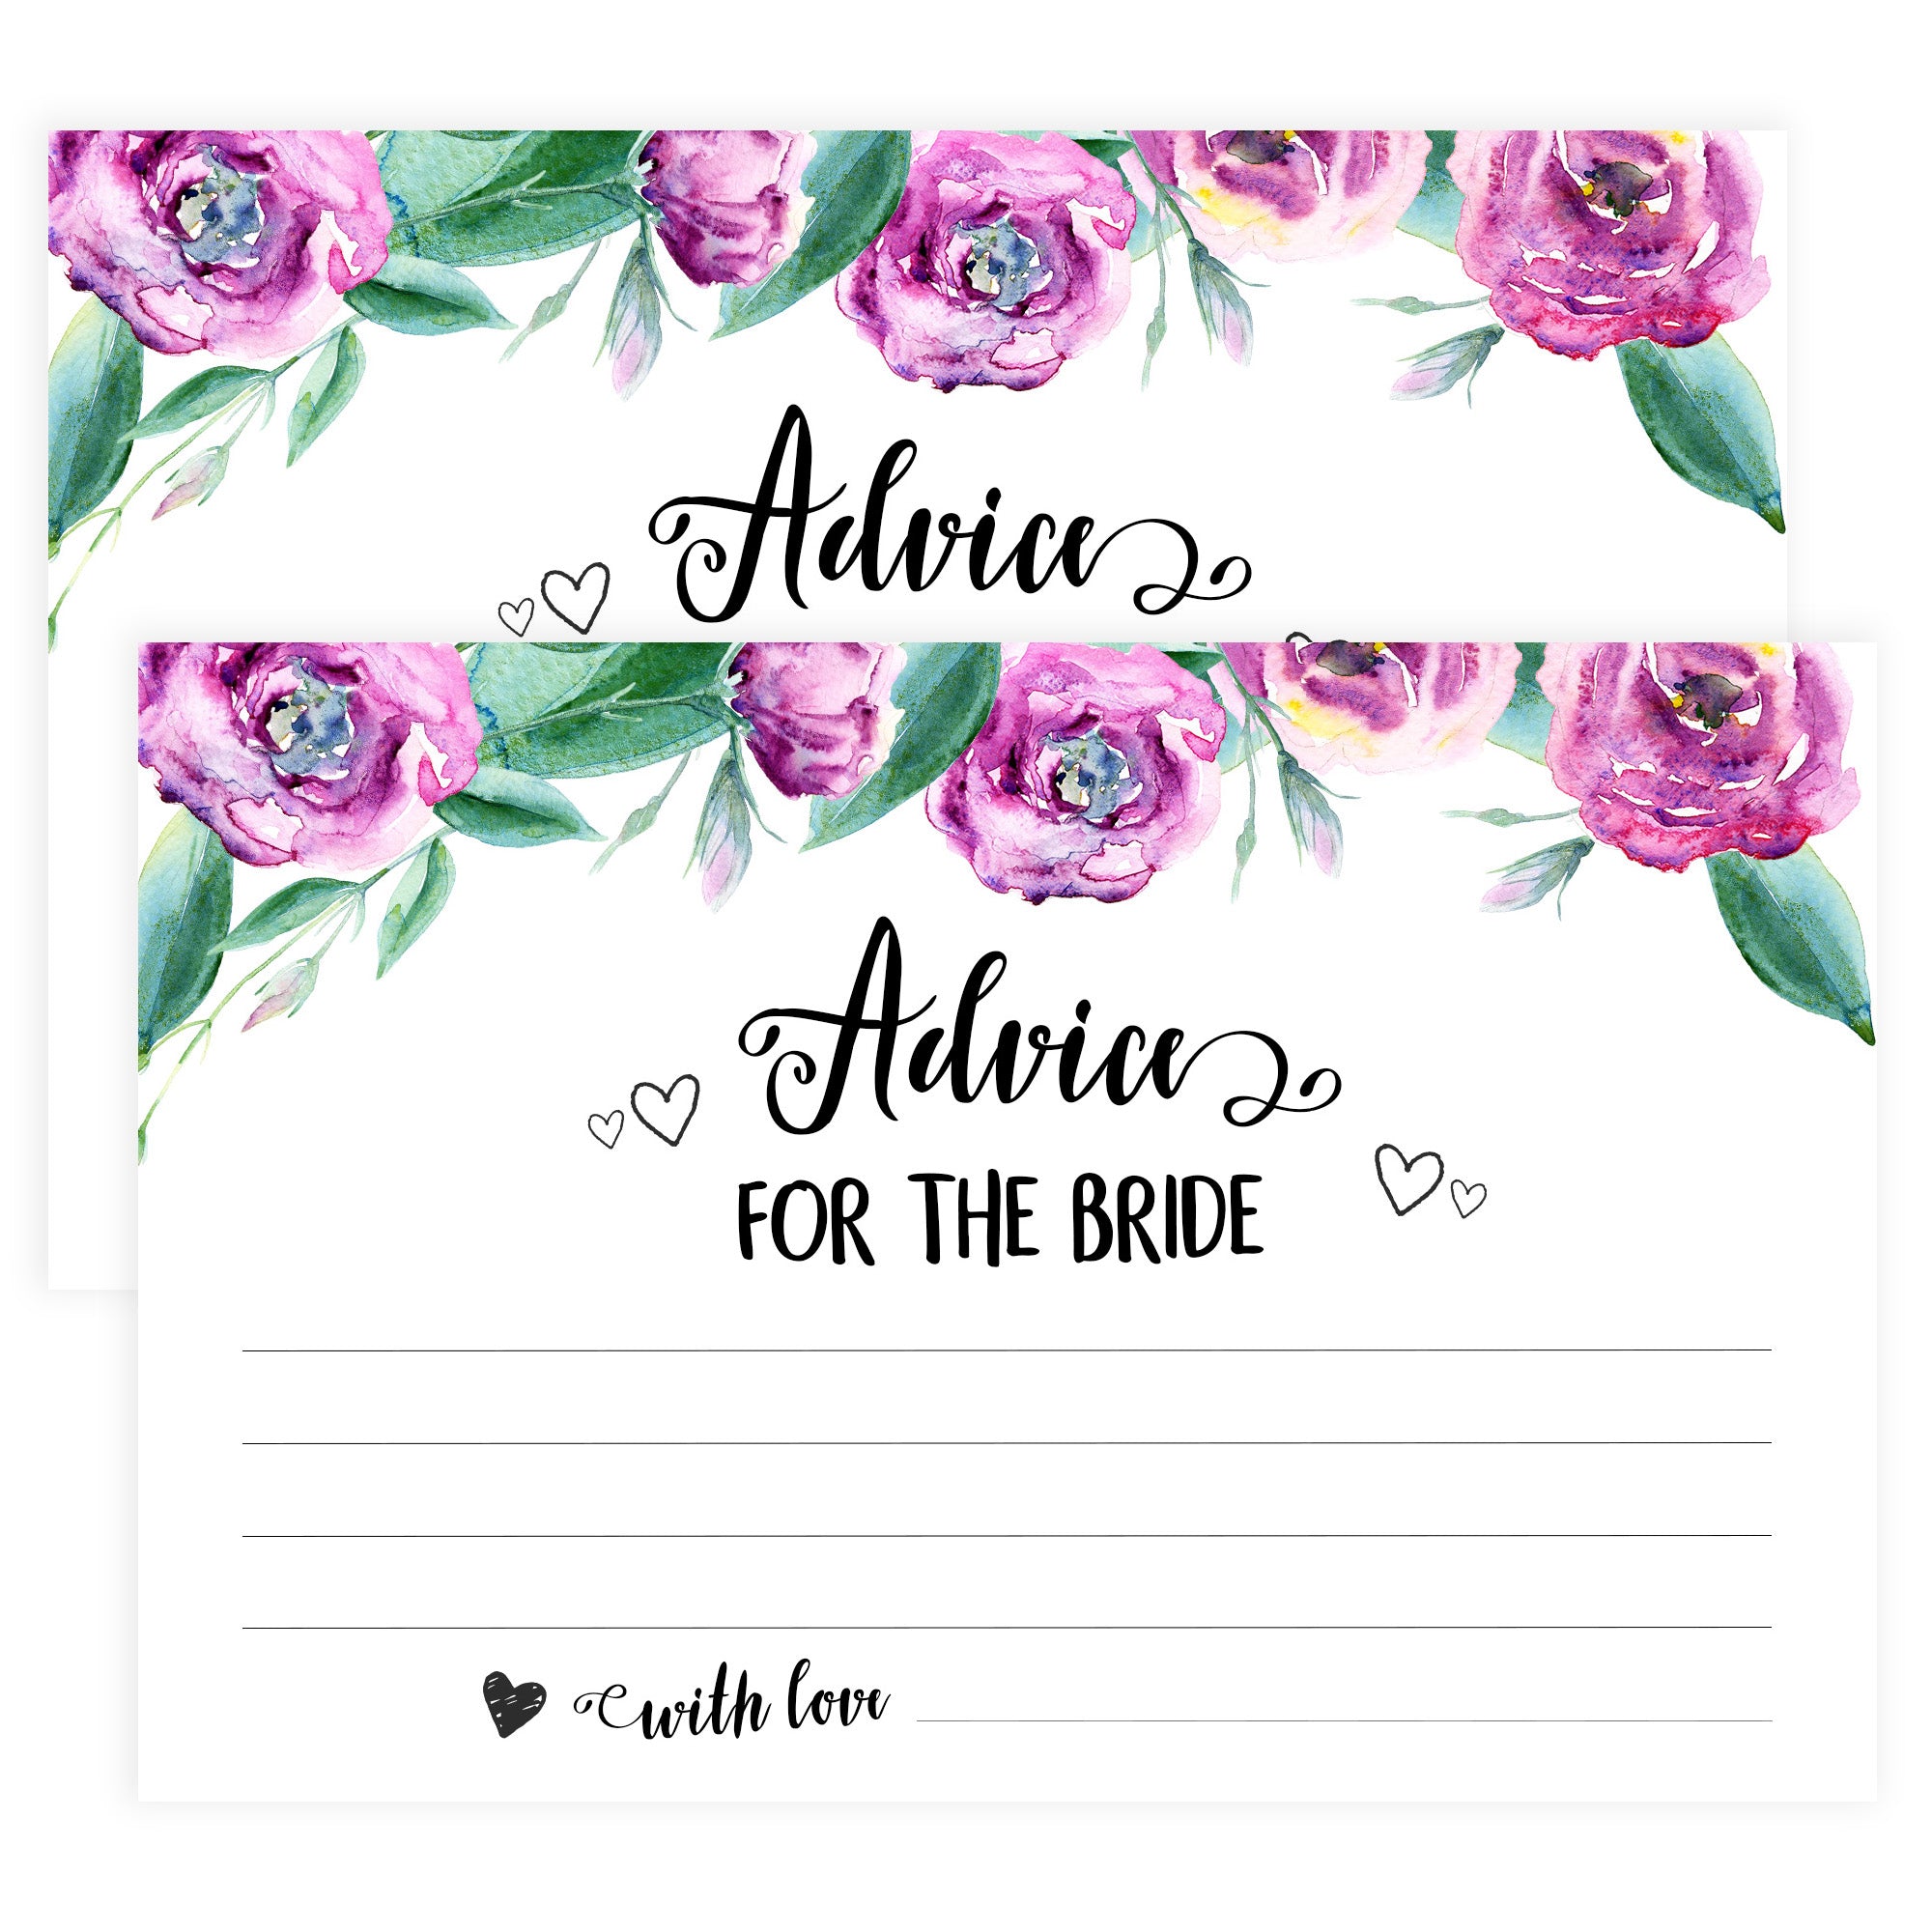 Advice for the Bride Cards - Purple Peonies